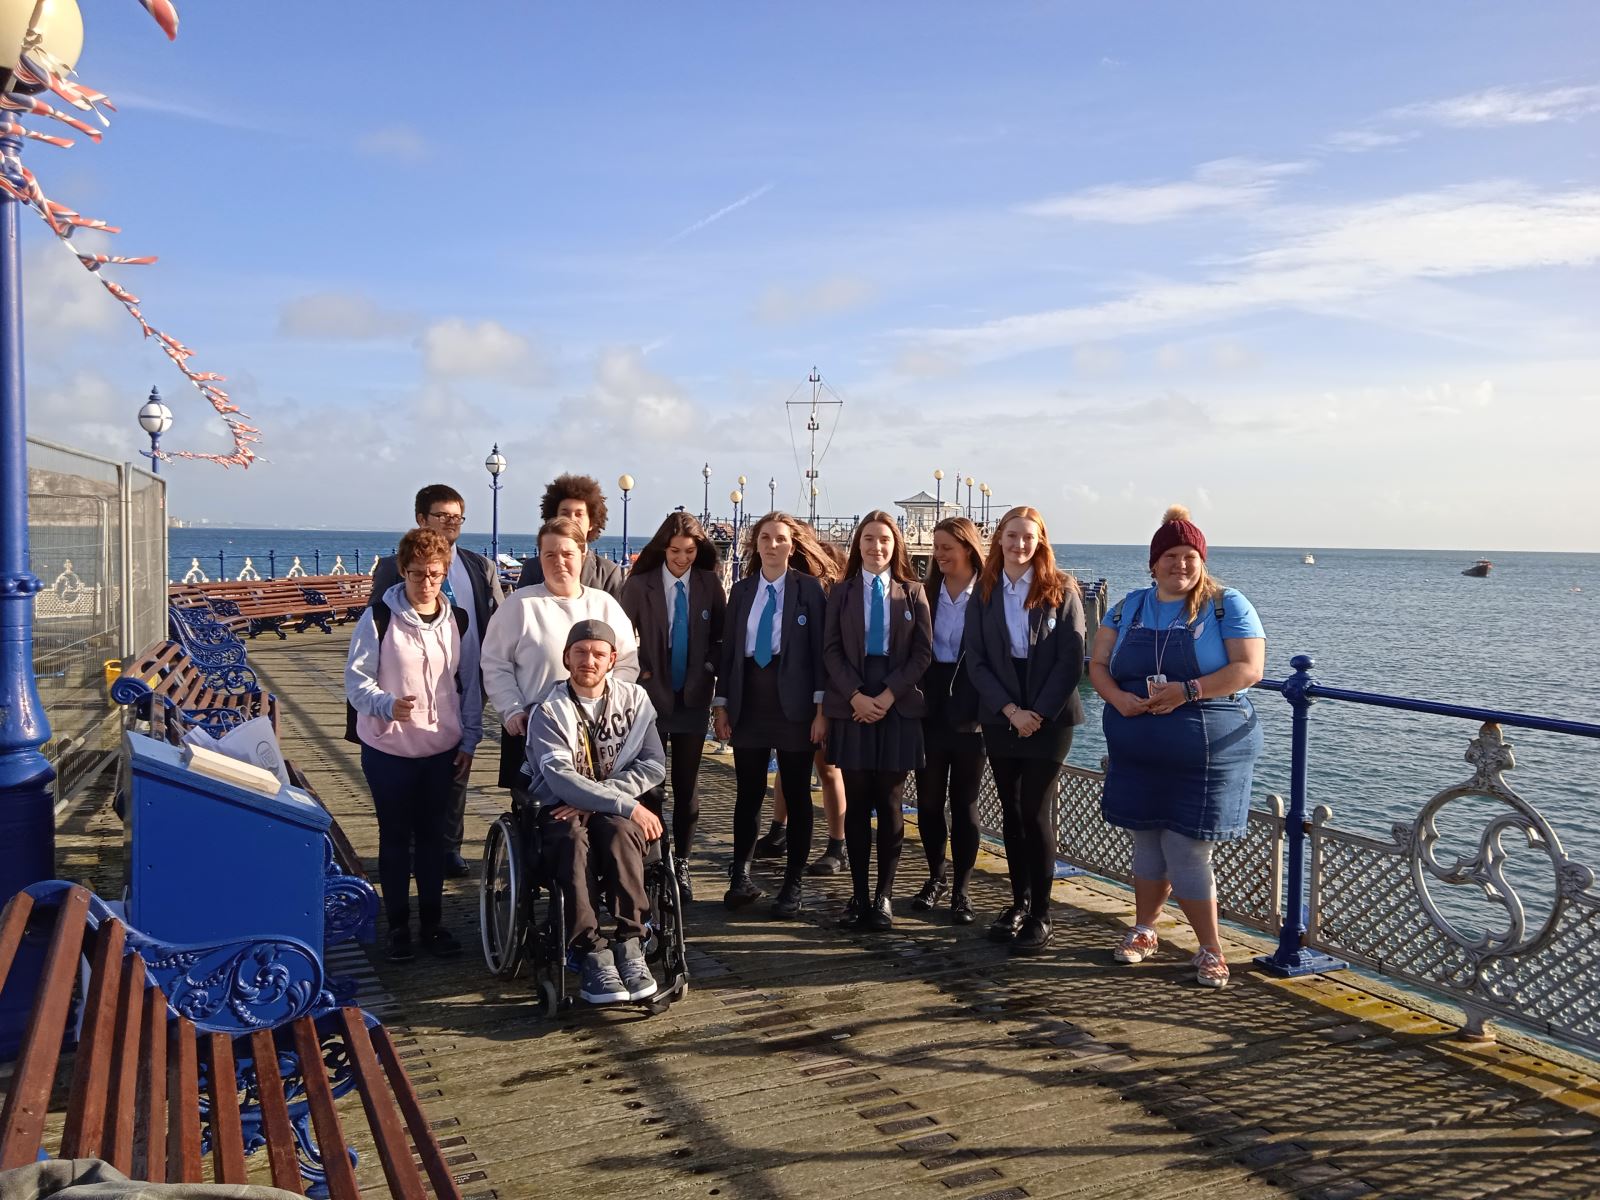 Group including students and young adults pose standing on Swanage Pier